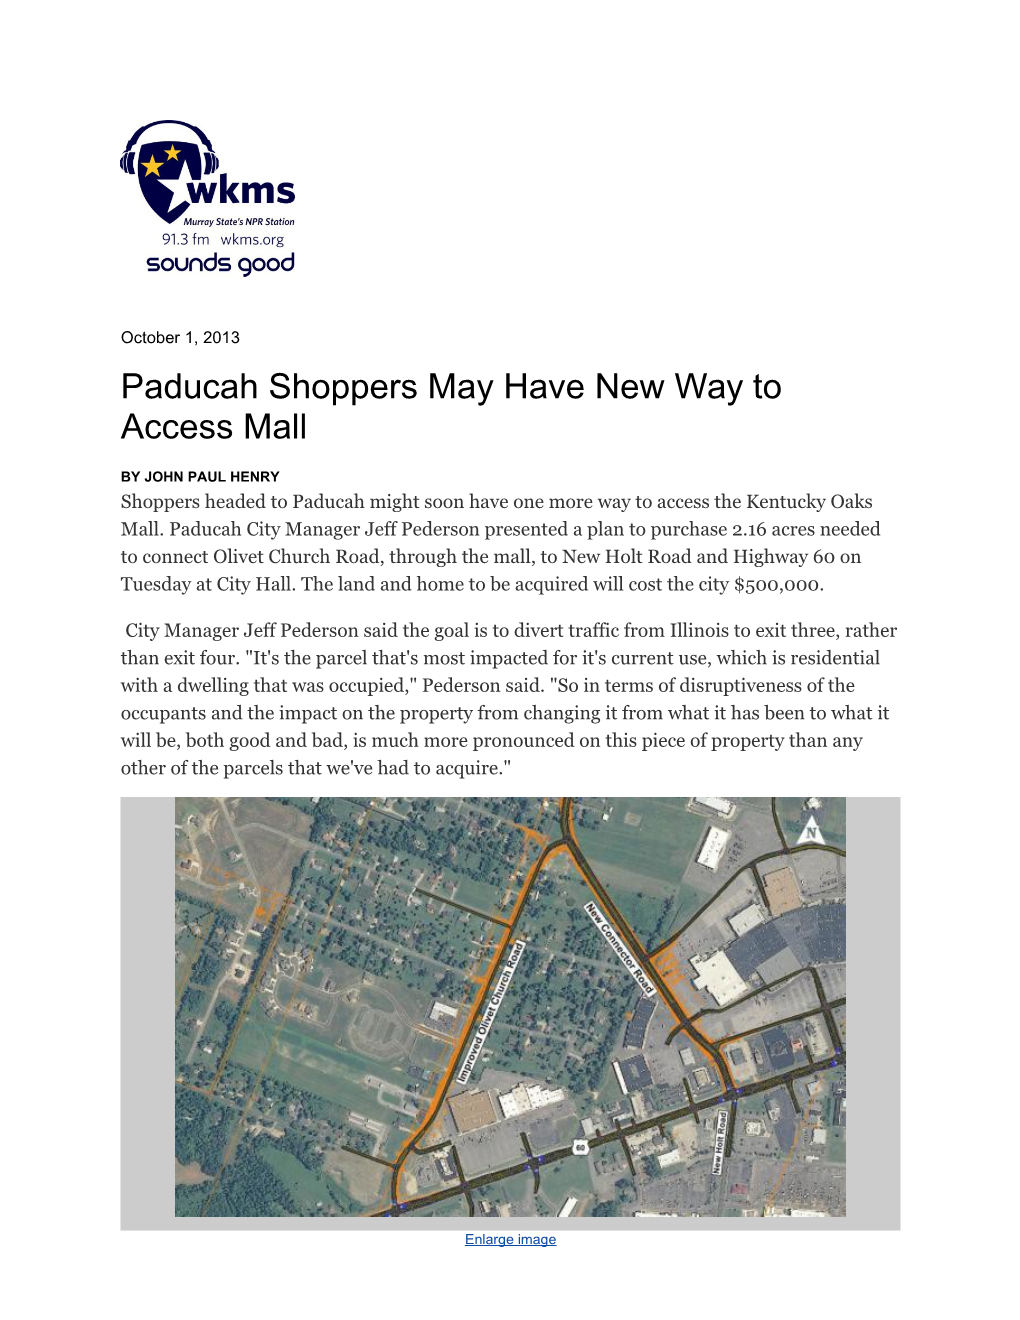 Paducah Shoppers May Have New Way to Access Mall